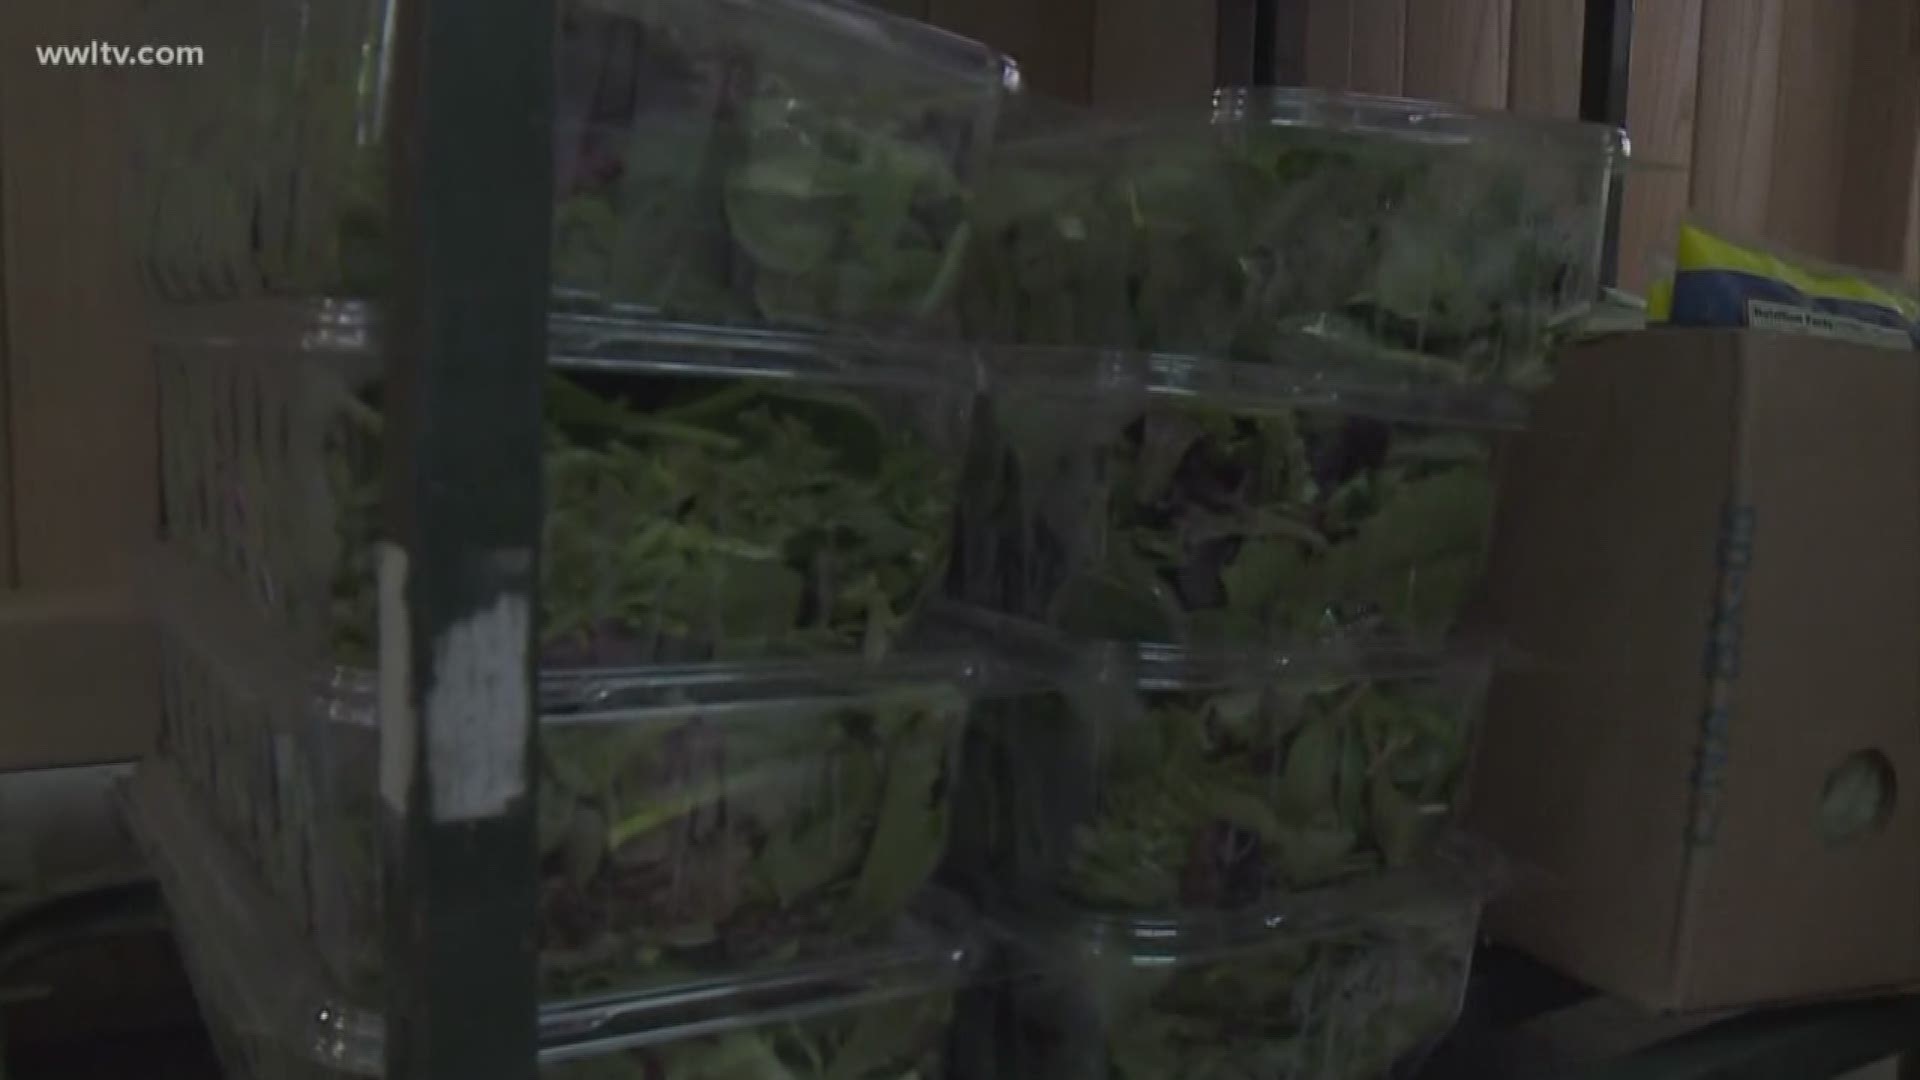 Local grocers were taking romaine lettuce off the shelves after a CDC warning regarding the possible contamination of the vegetable.